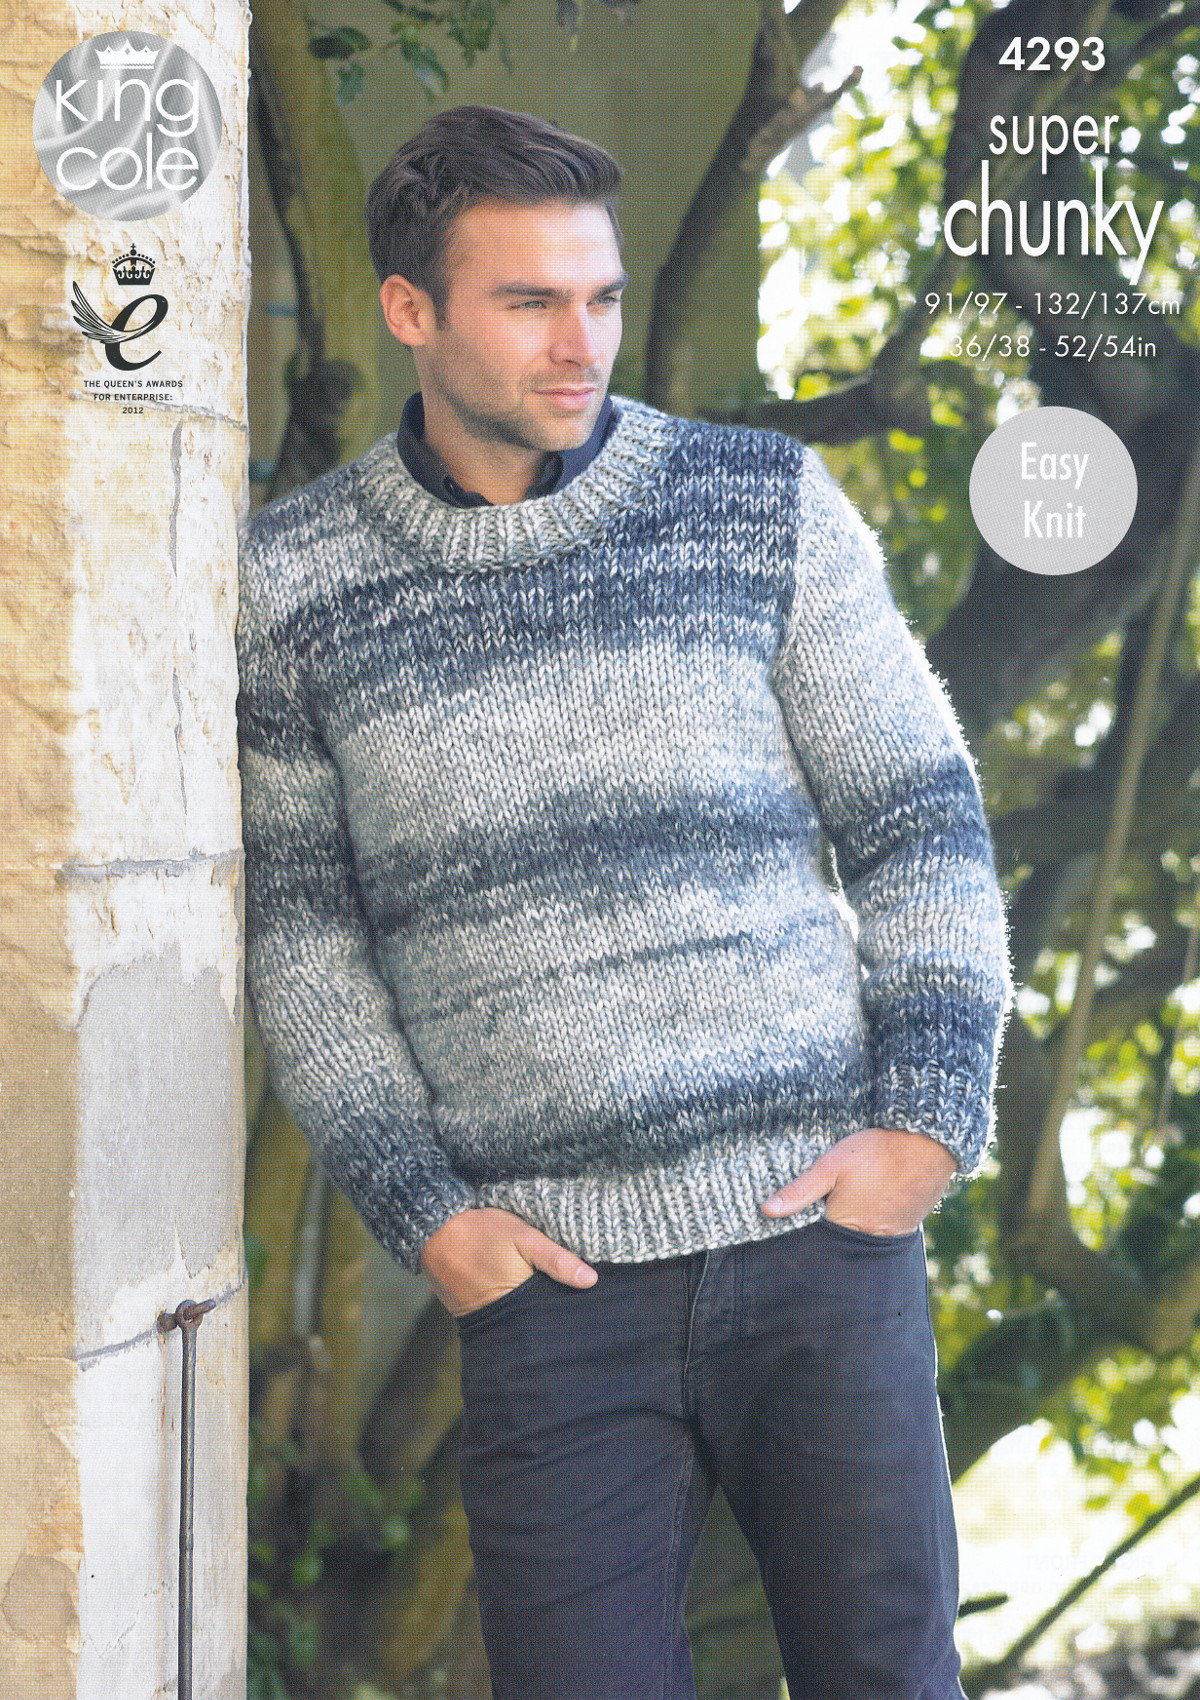 Mens Knit Patterns Details About King Cole Mens Super Chunky Knitting Pattern Easy Knit Jumper Waistcoat 4293